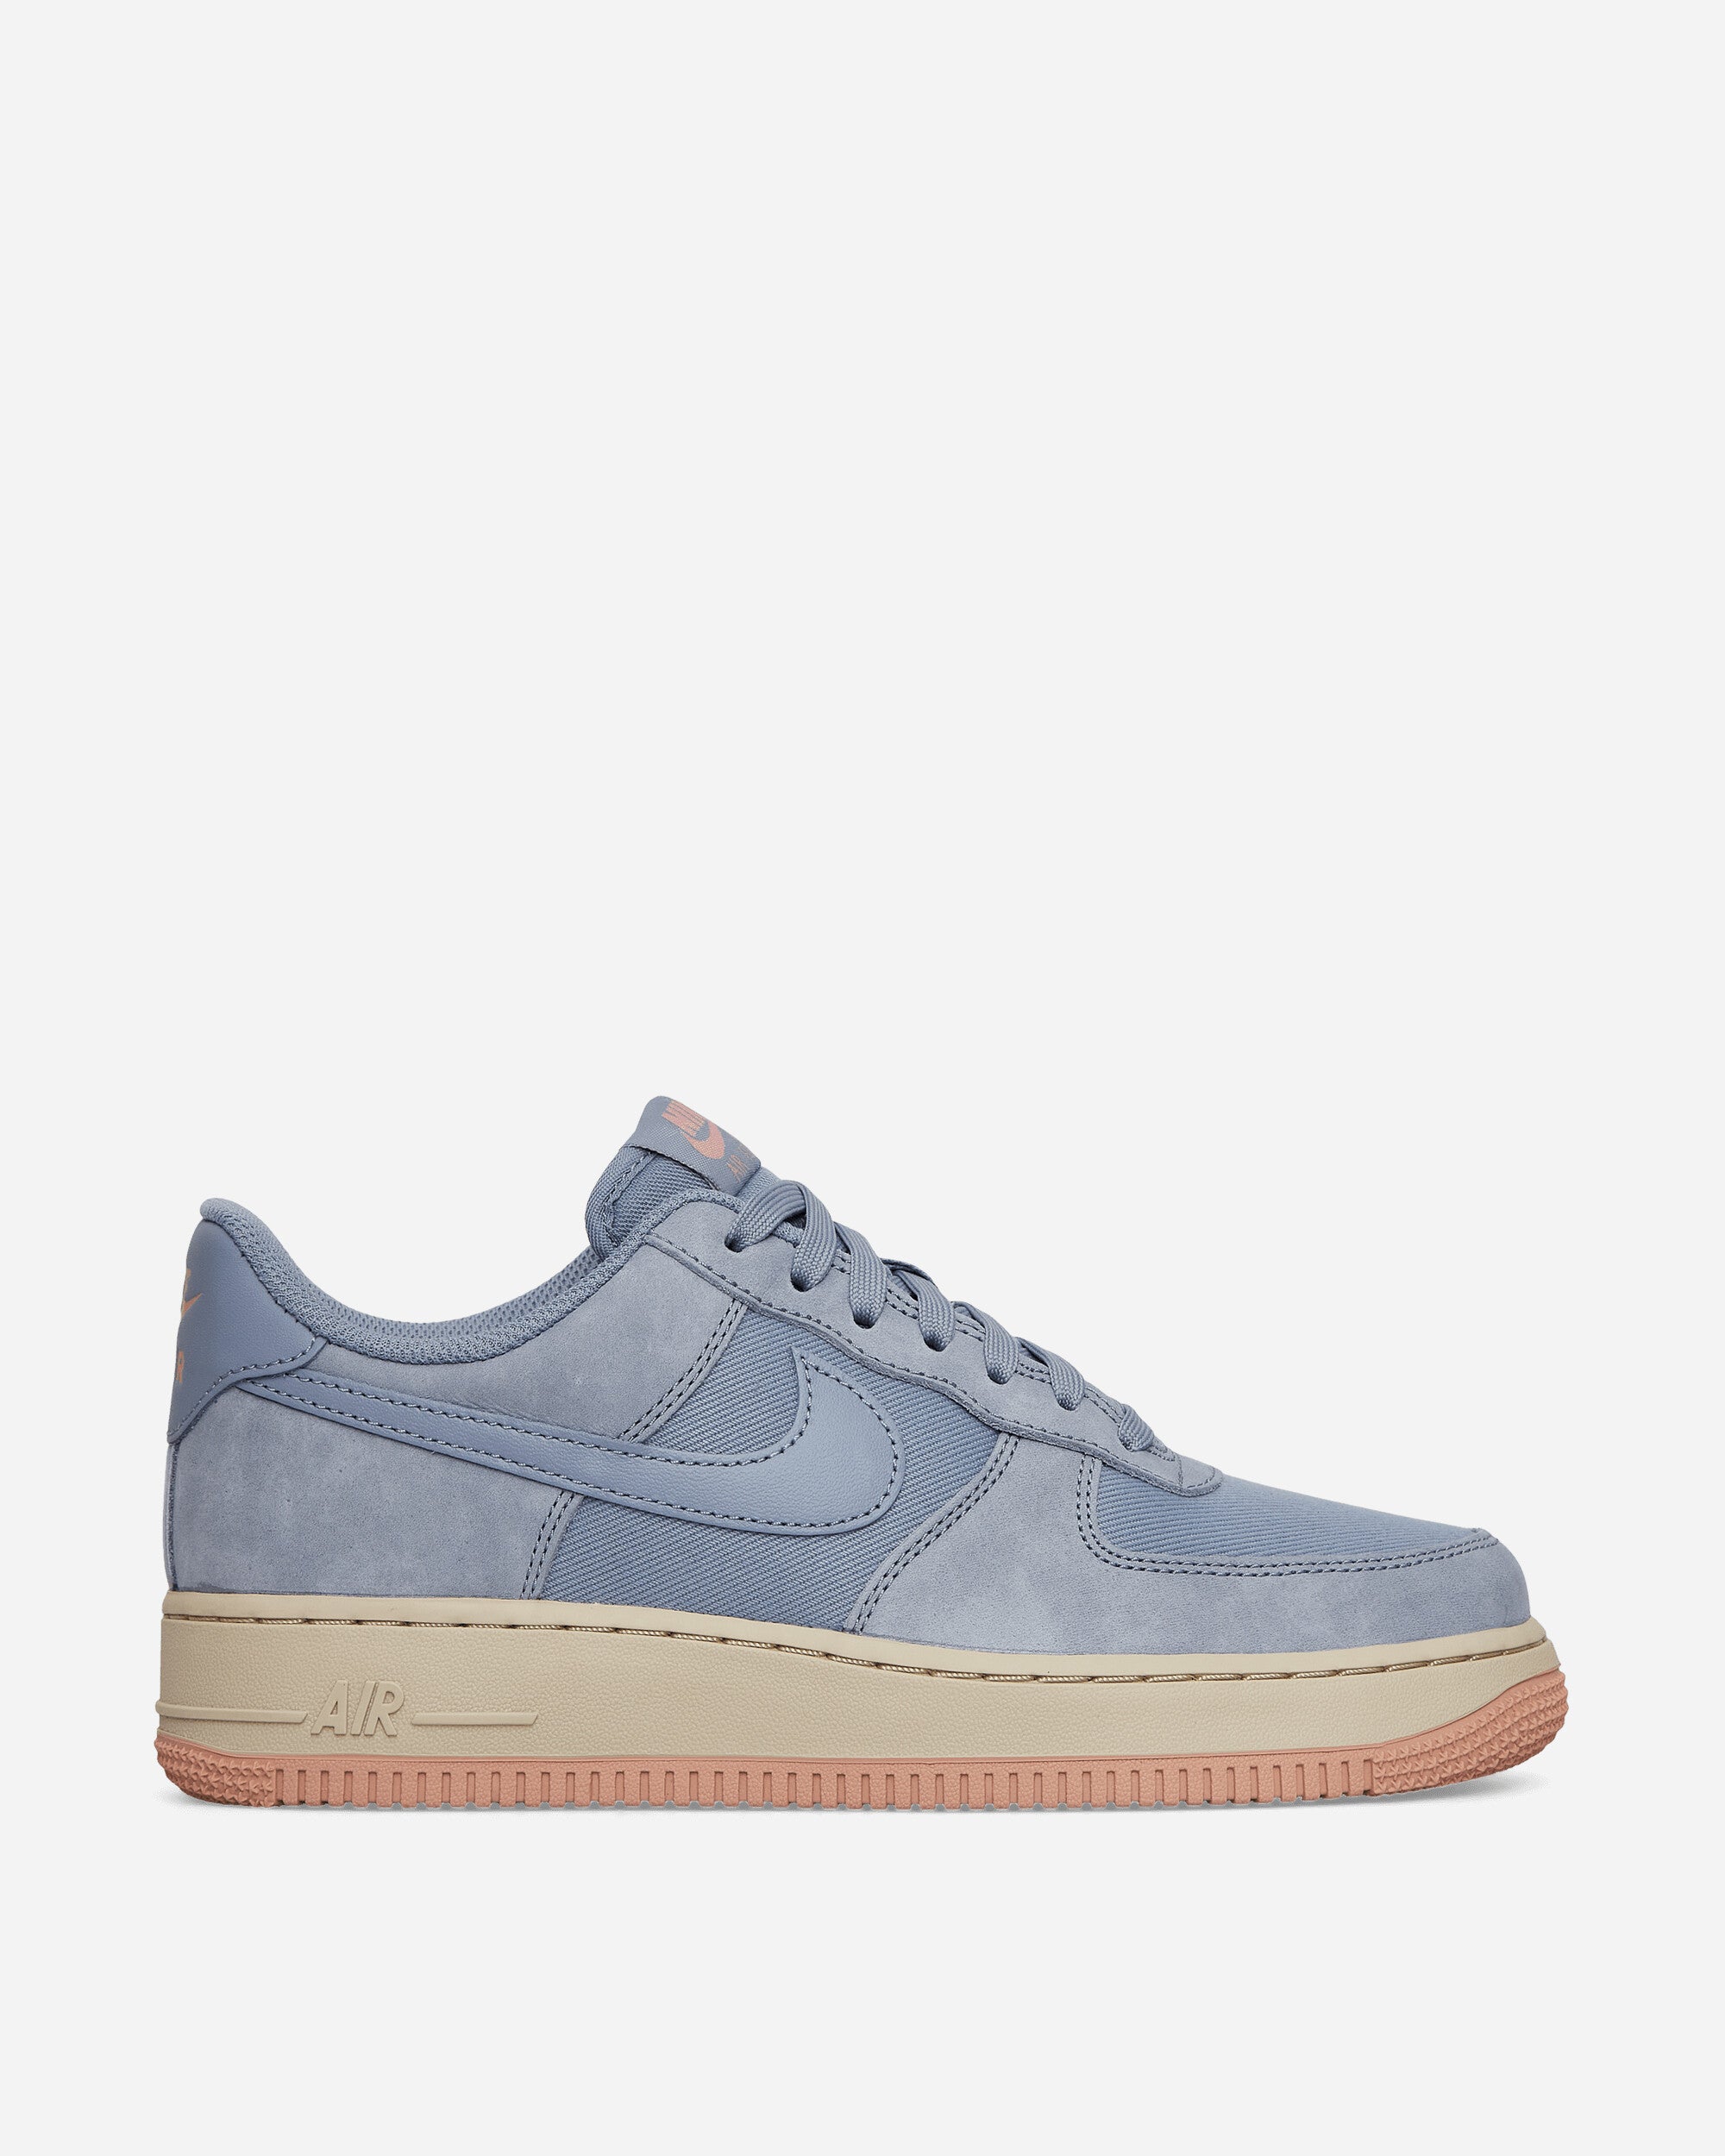 Air Force 1 '07 LX Sneakers Ashen Slate